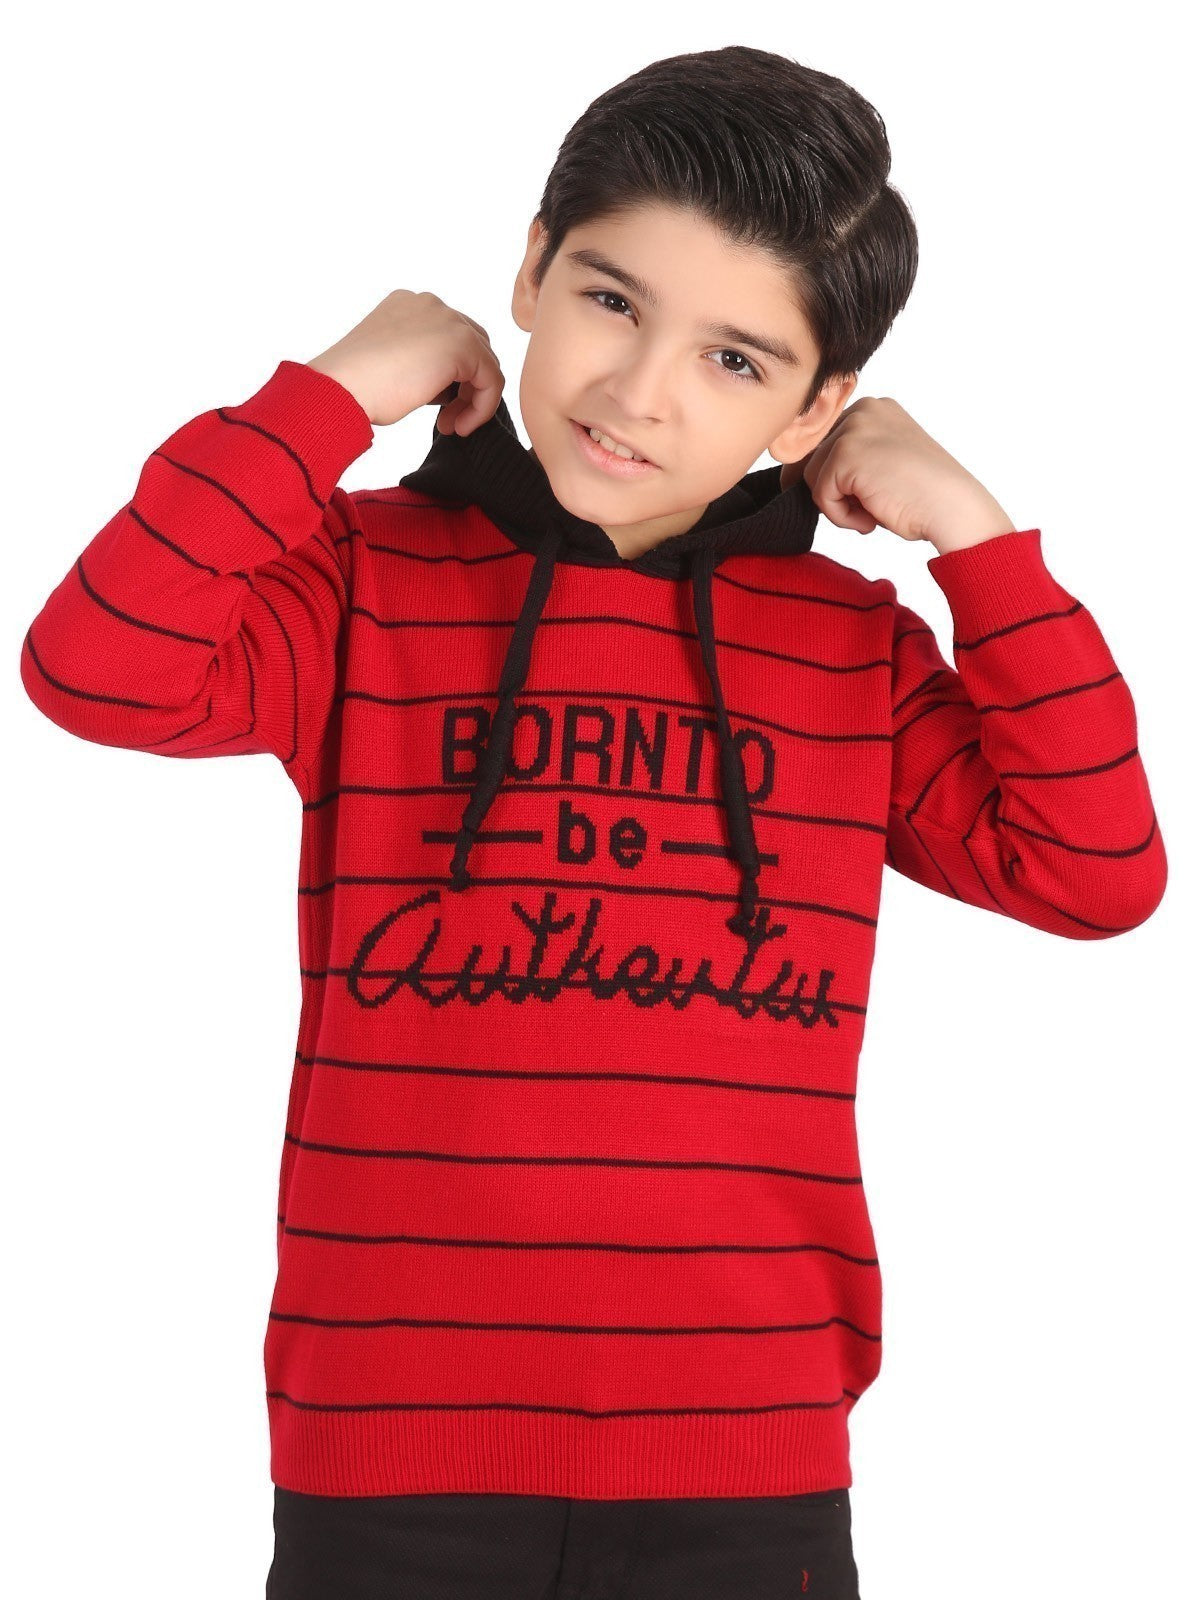 Boy's Red Sweater - EBTSWT19-014